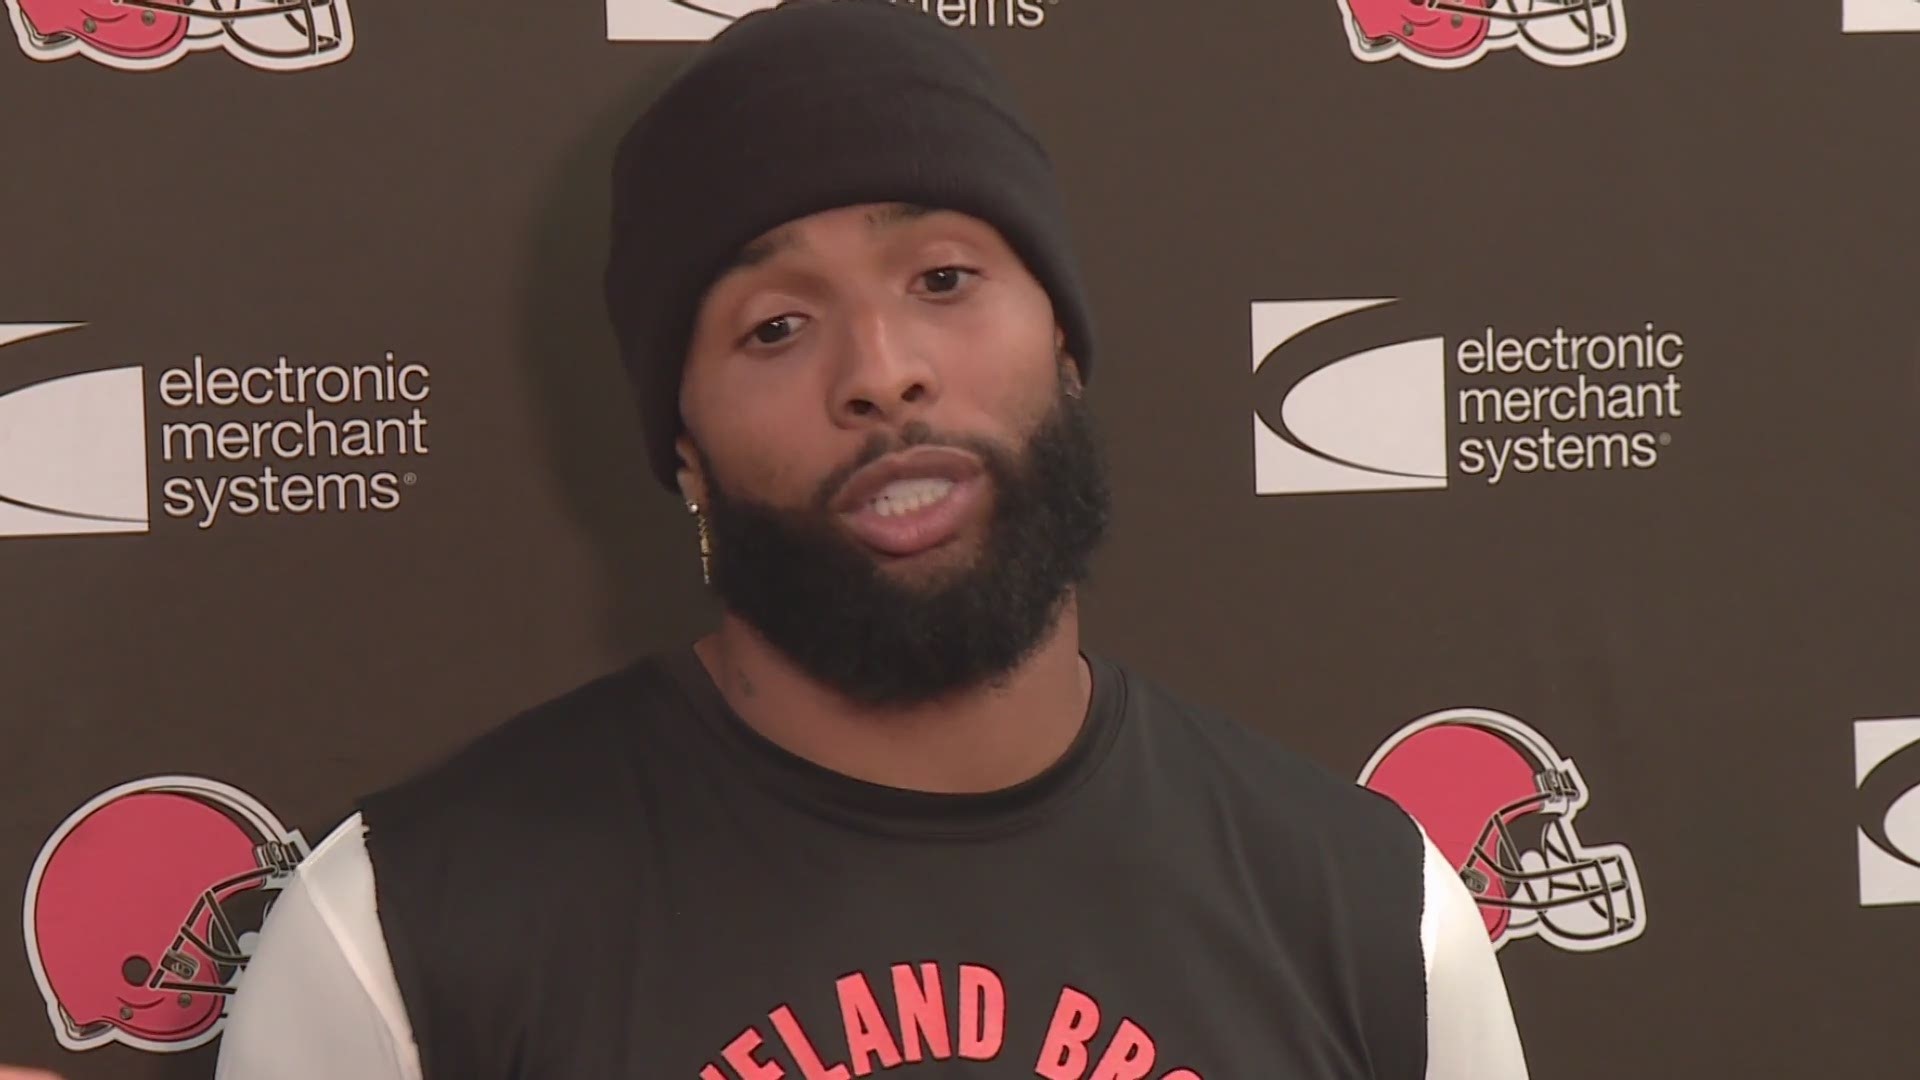 Odell Beckham Jr. hysterically roasts Browns, city of Cleveland